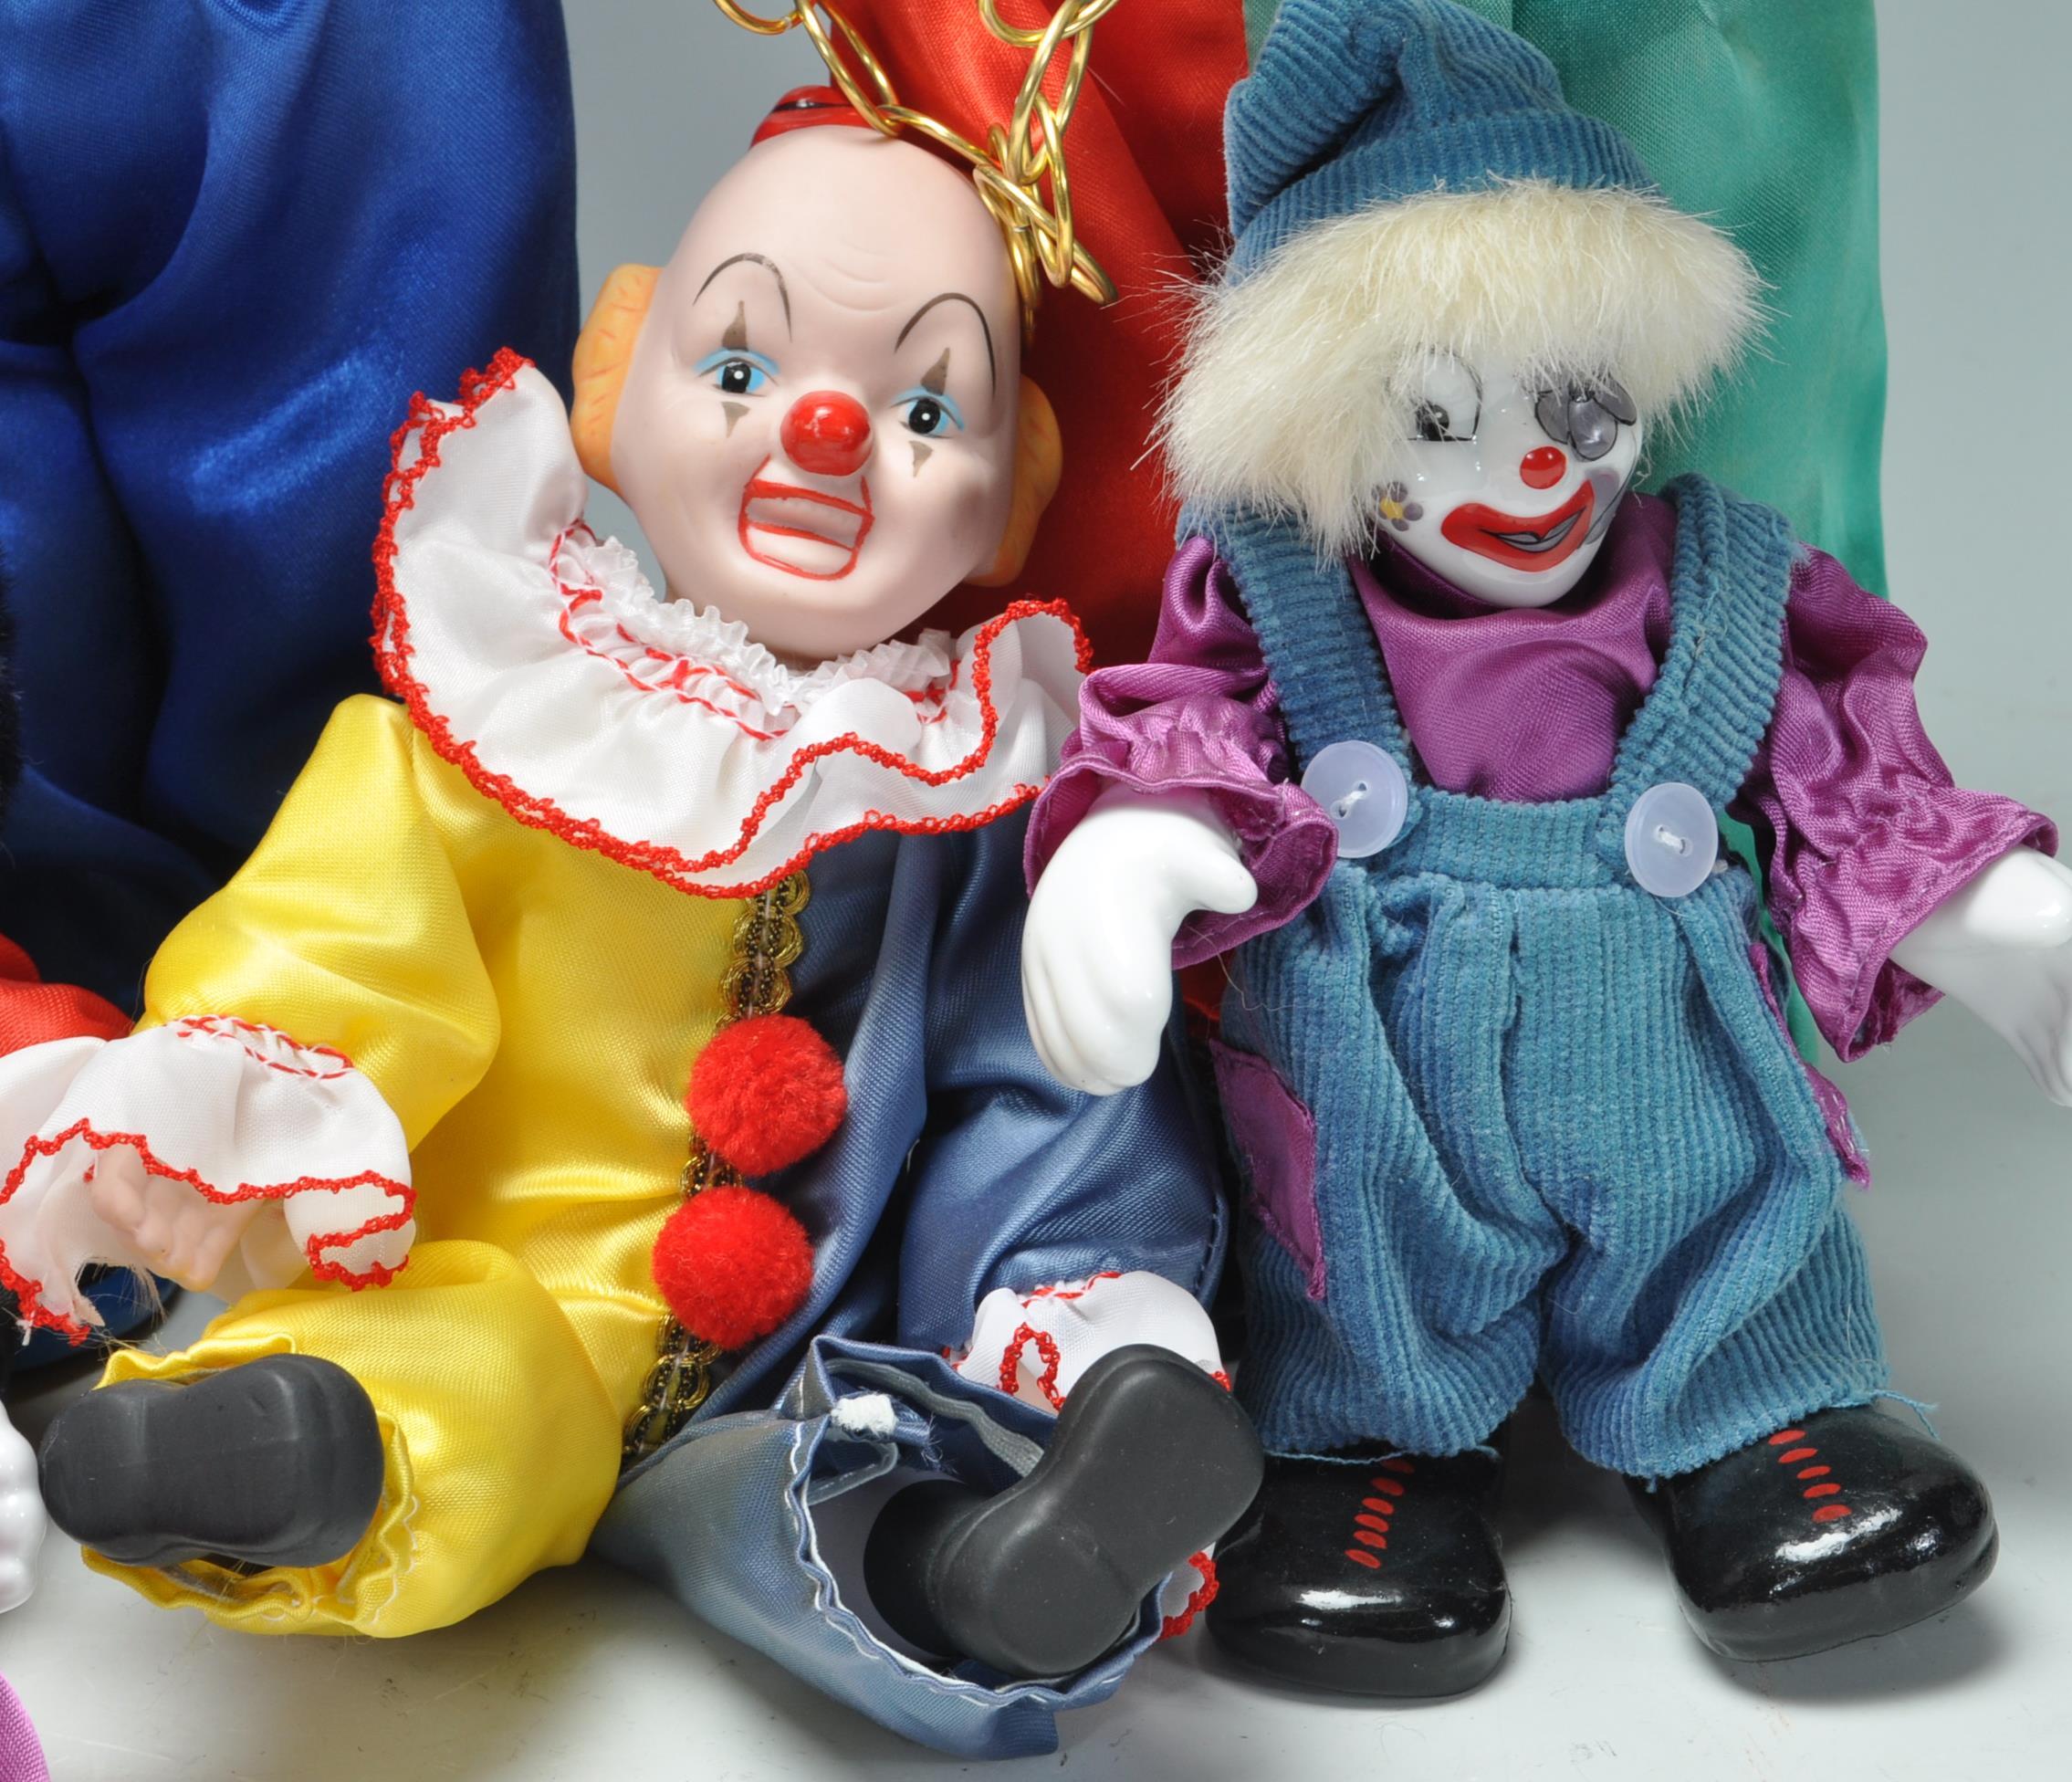 LARGE COLLECTION OF CLOWN FIGURINES WITH PORCELAIN FACES - Image 2 of 9